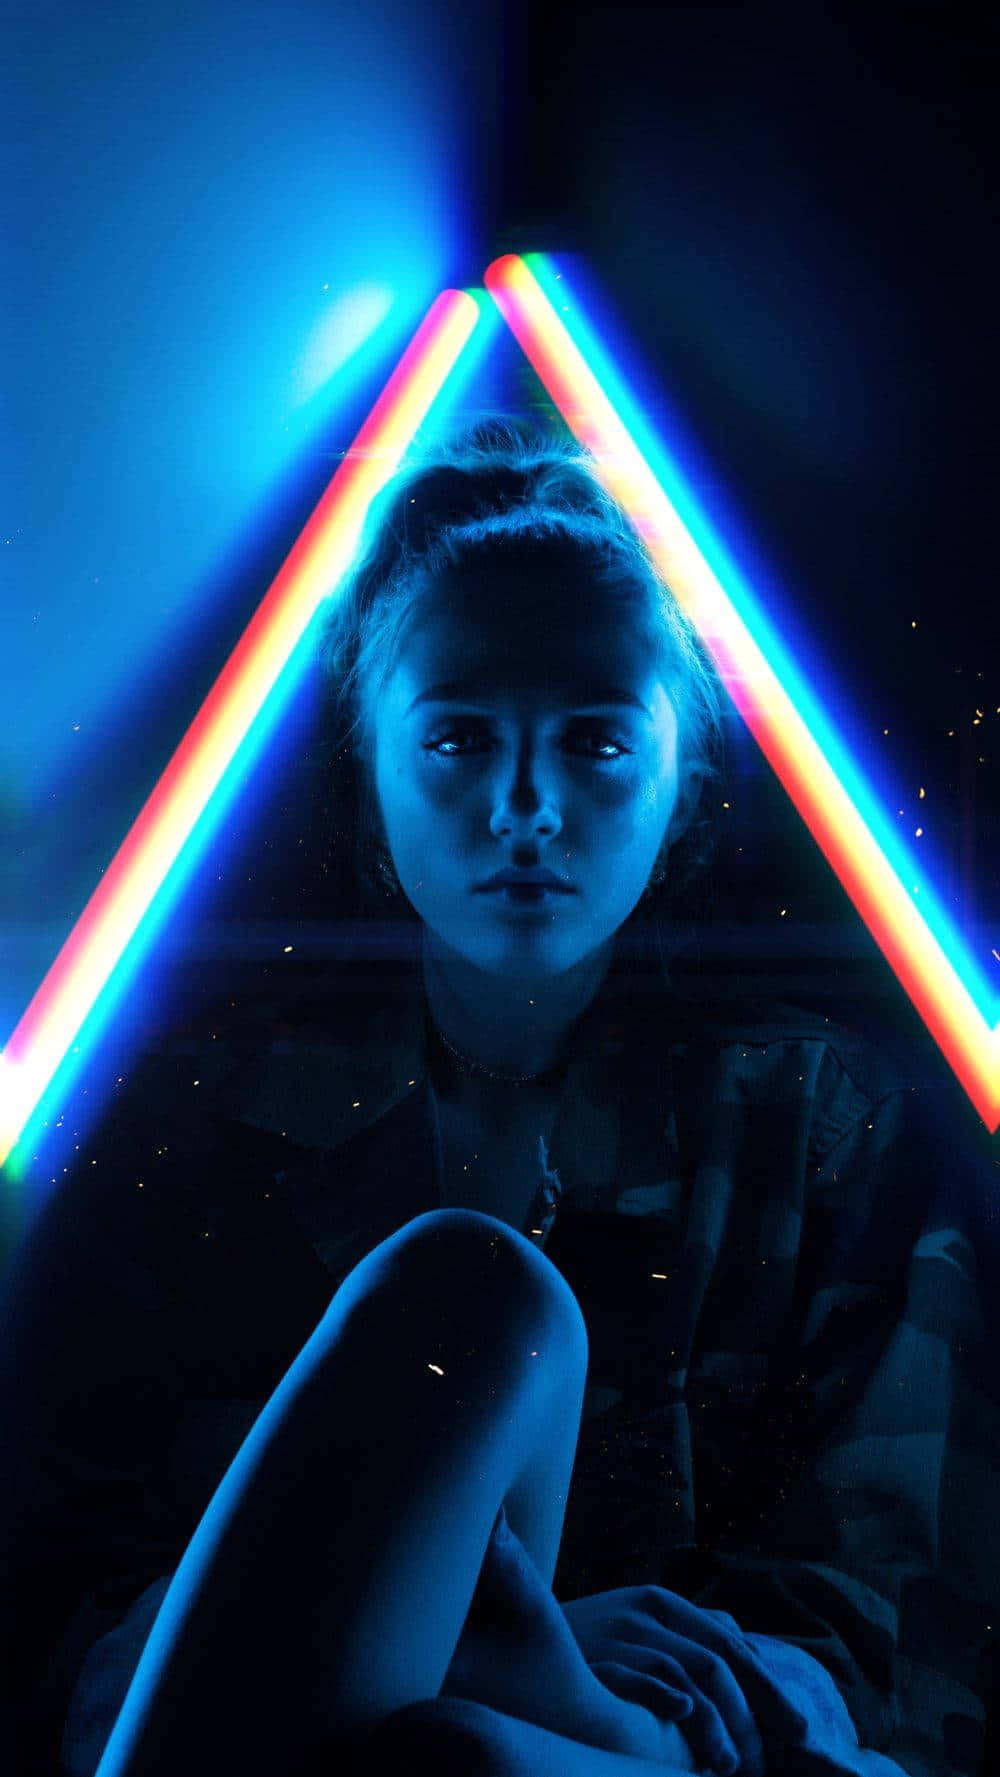 Young Woman Profile Under Trippy Blue Lights Wallpaper